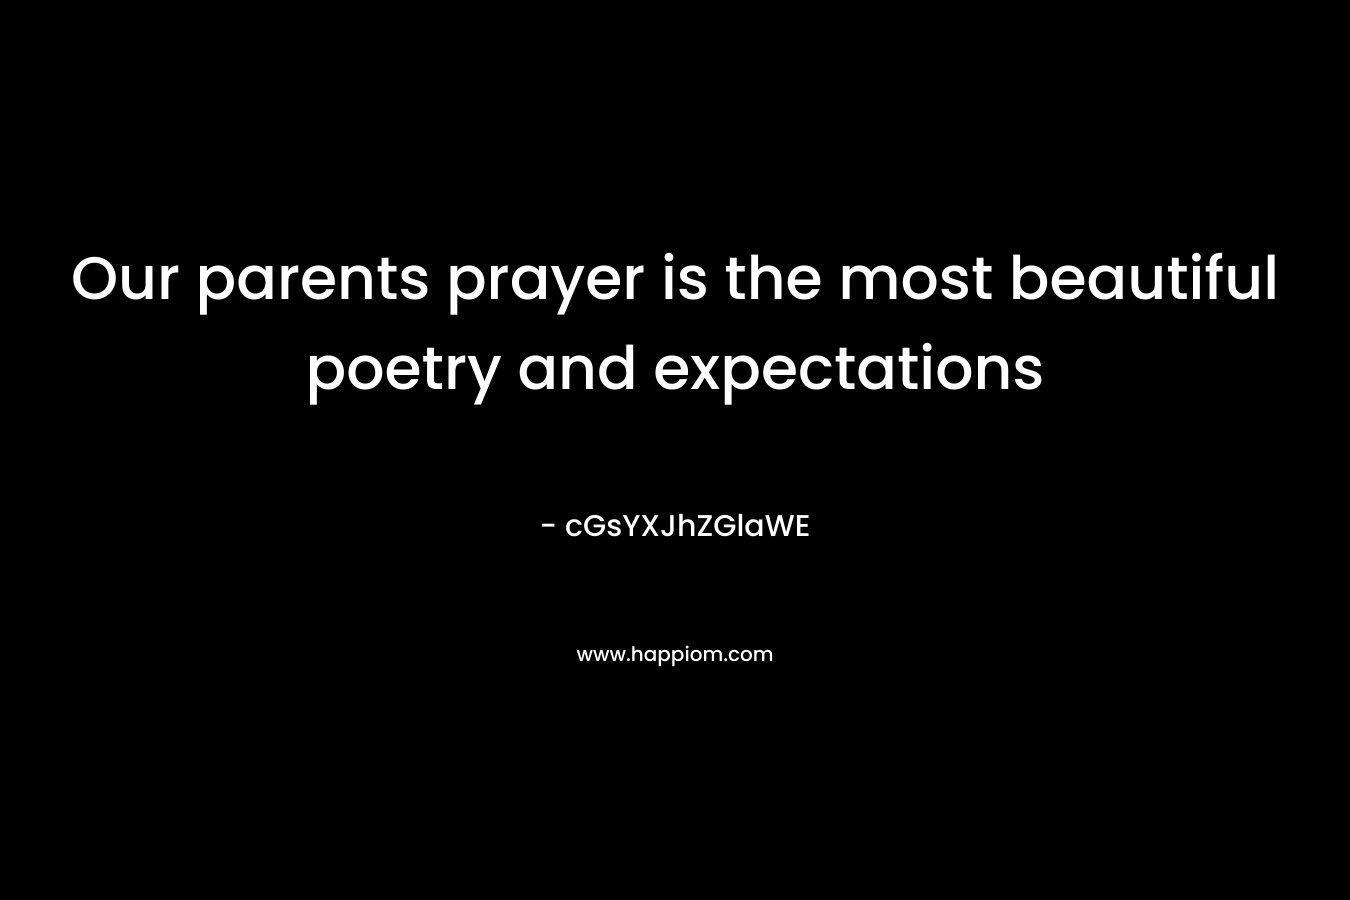 Our parents prayer is the most beautiful poetry and expectations